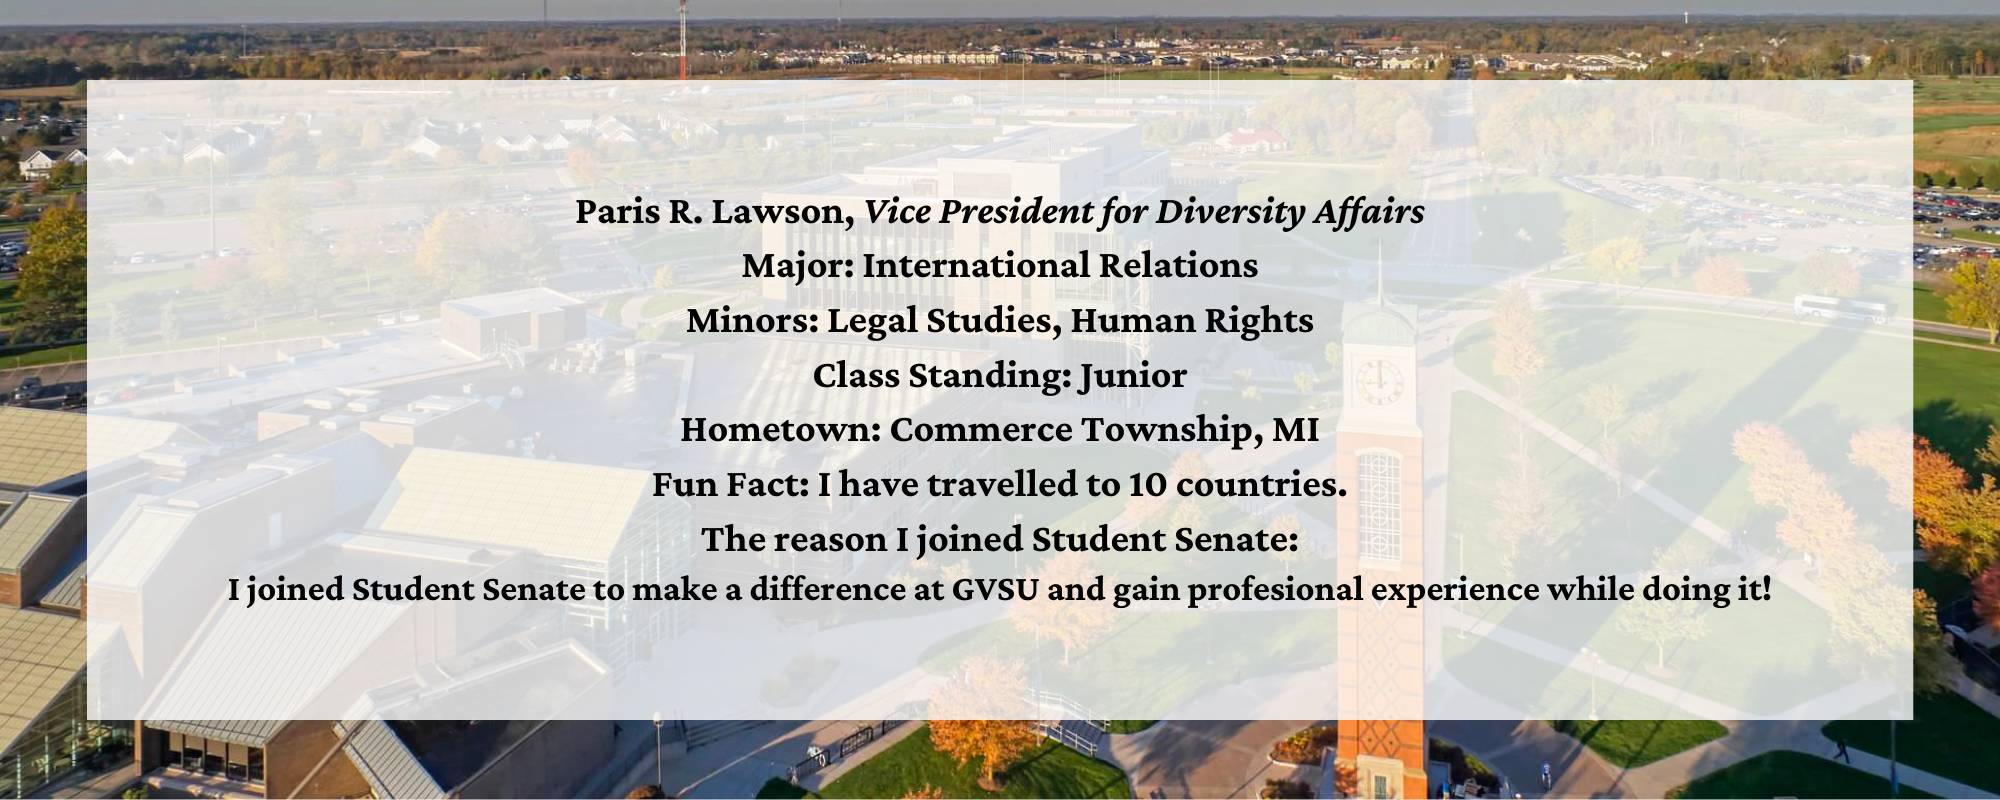 Paris Lawson, Vice President for Diversity Affairs. Major: International Relations. Minors: Legal Studies, Human Rights. Class Standing: Junior. Hometown: Commerce Township, MI. Fun Fact: I have travelled to 10 countries. The reason I joined Student Senate: I joined Student Senate to make a difference at GVSU and gain profesional experience while doing it!